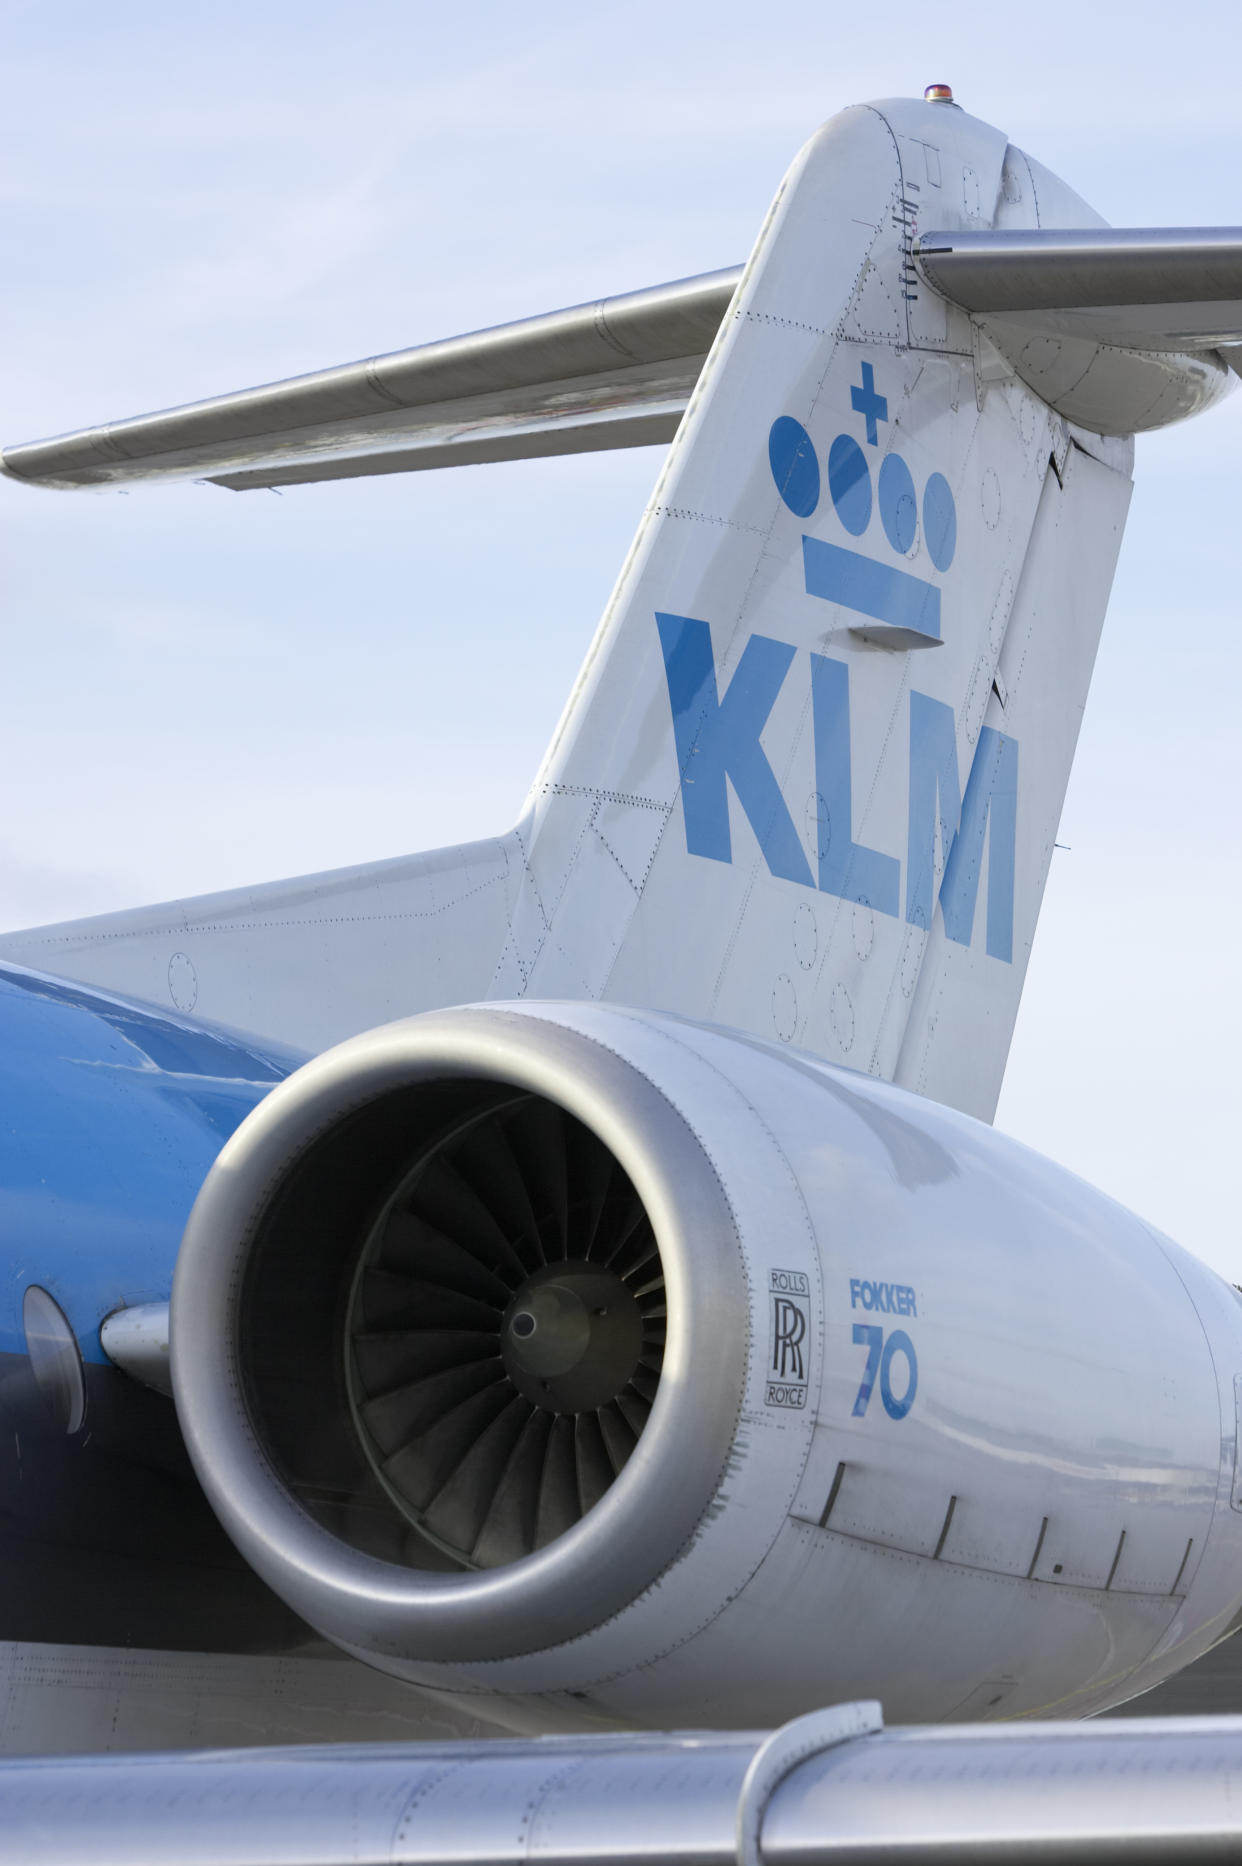 KLM Royal Dutch Airlines has expressed sympathy for a dog that died on a flight from Amsterdam to Los Angeles. The owner is reportedly devastated. (Photo: Getty Images)